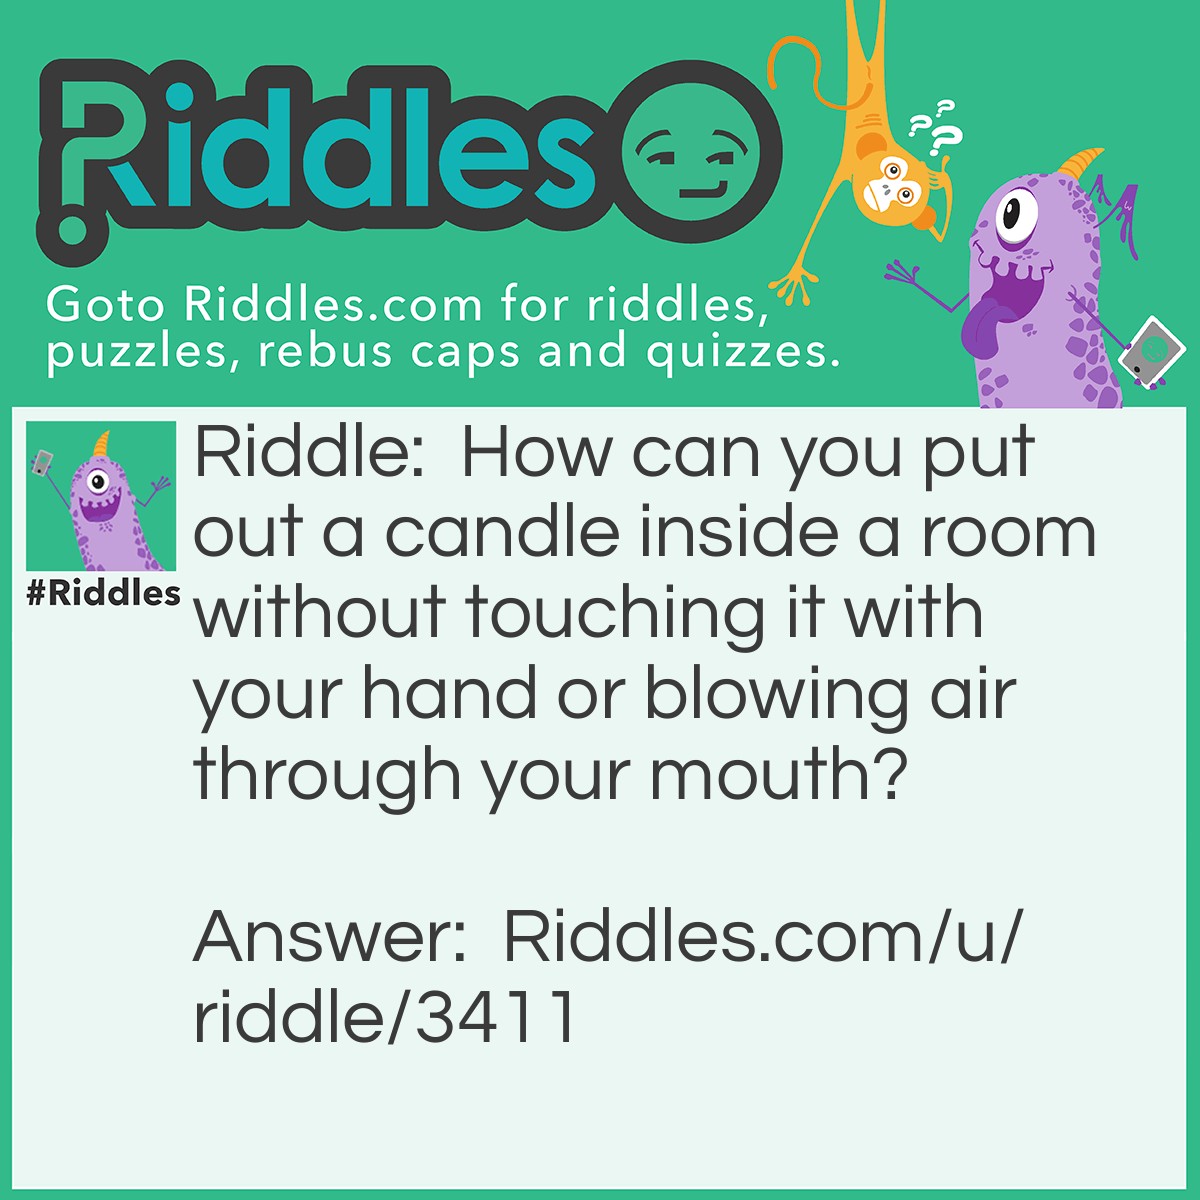 Riddle: How can you put out a candle inside a room without touching it with your hand or blowing air through your mouth? Answer: By switchoning the fan.